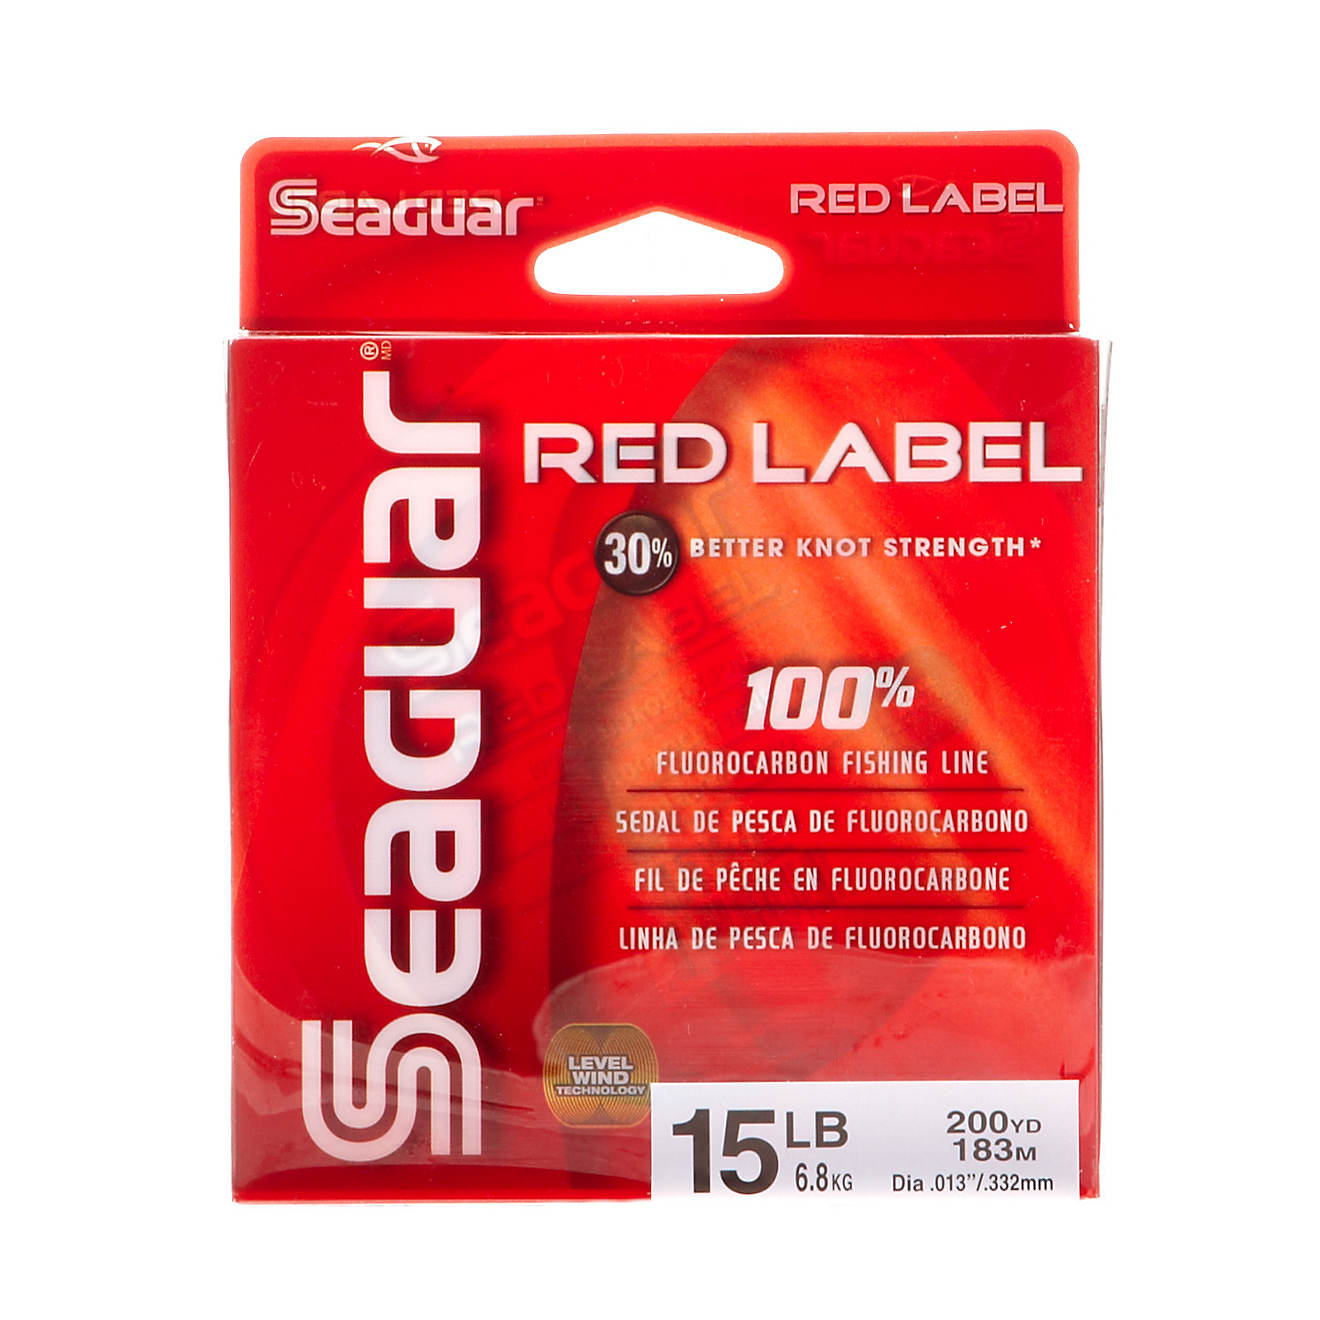 Seaguar® Red Label 15 lb. - 200 yards Fluorocarbon Fishing Line                                                                 - view number 1